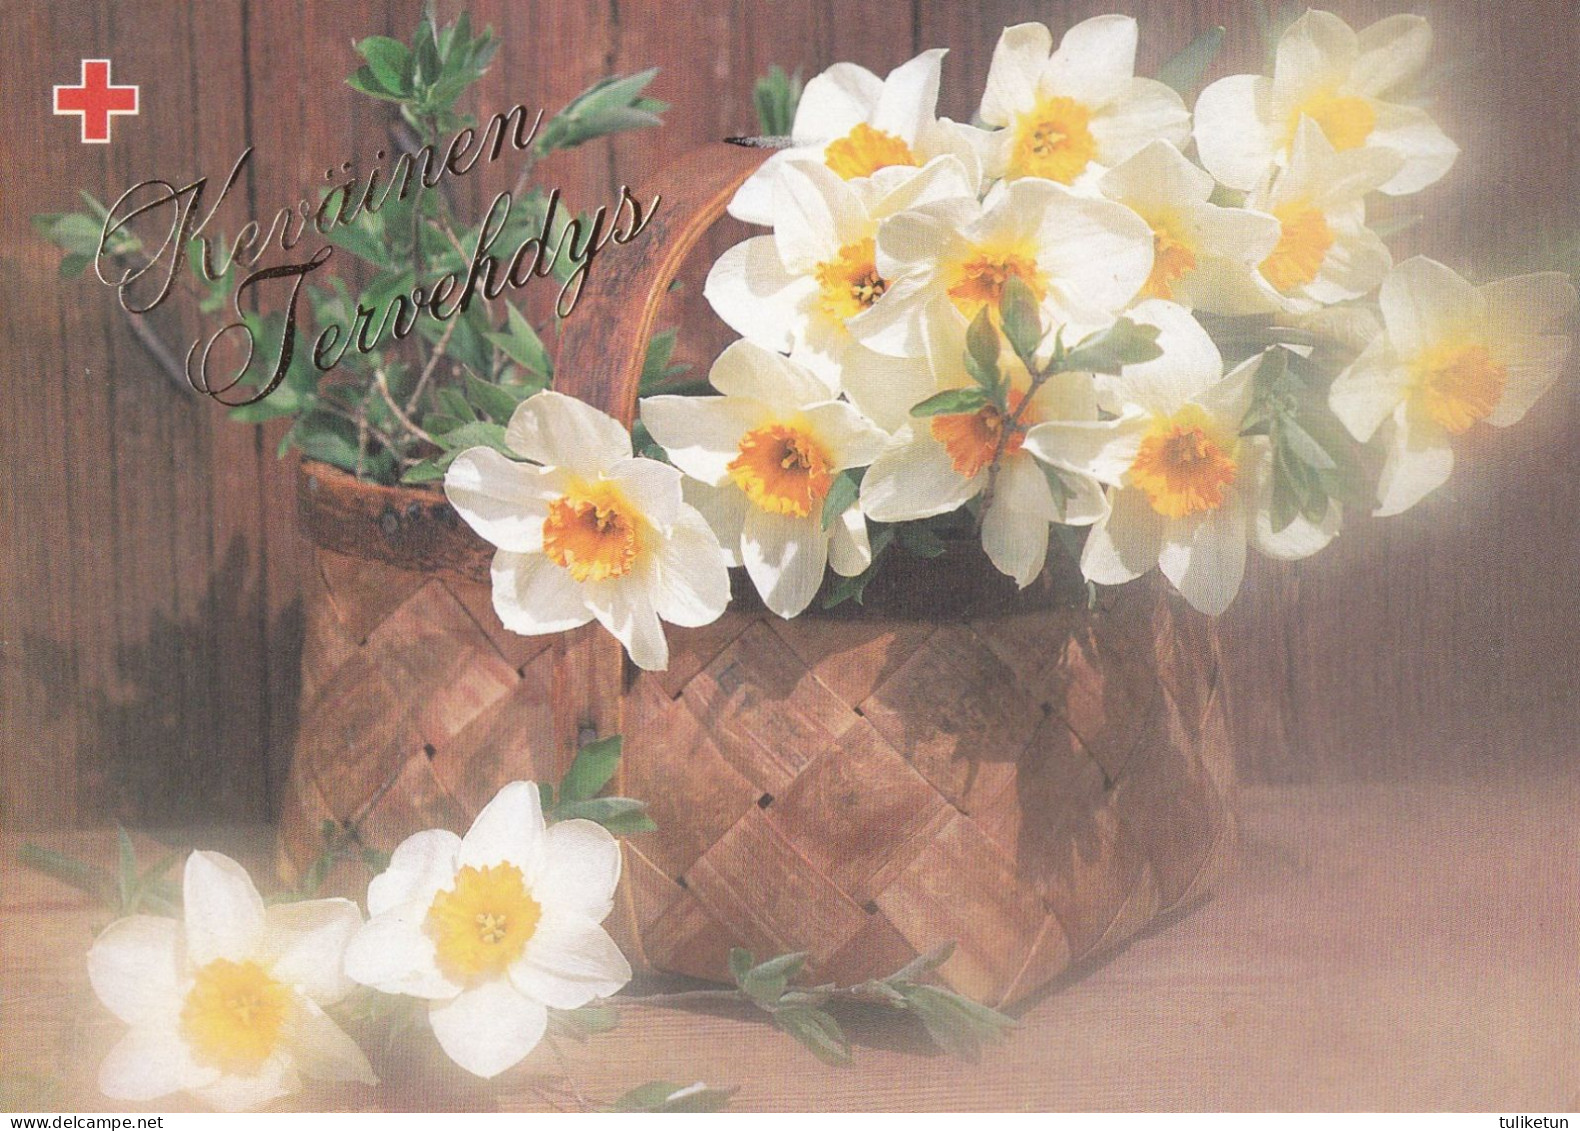 Postal Stationery - Easter Flowers - Daffodils In The Basket - Red Cross 1997 - Suomi Finland - Postage Paid - Postal Stationery